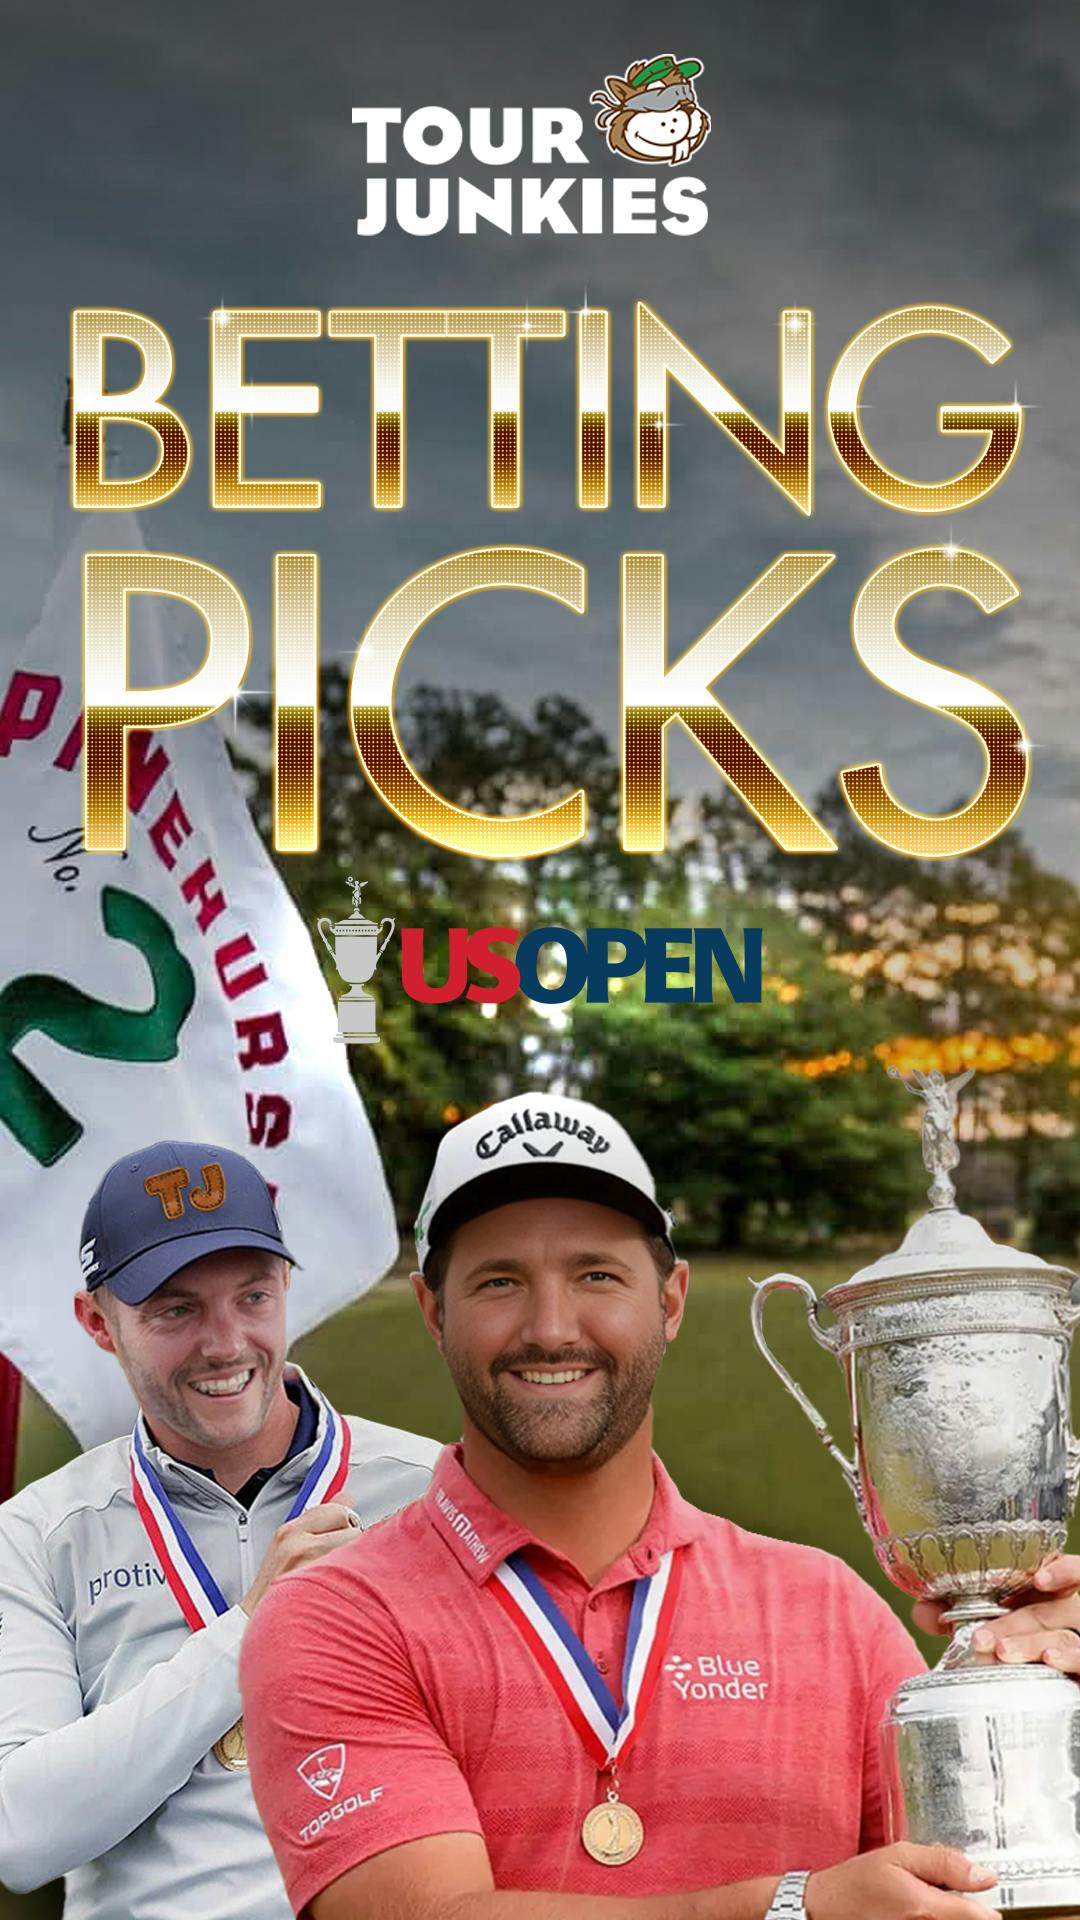 The US Open Betting Show! | Preview, Odds, Best Bets & Picks at Pinehurst No 2